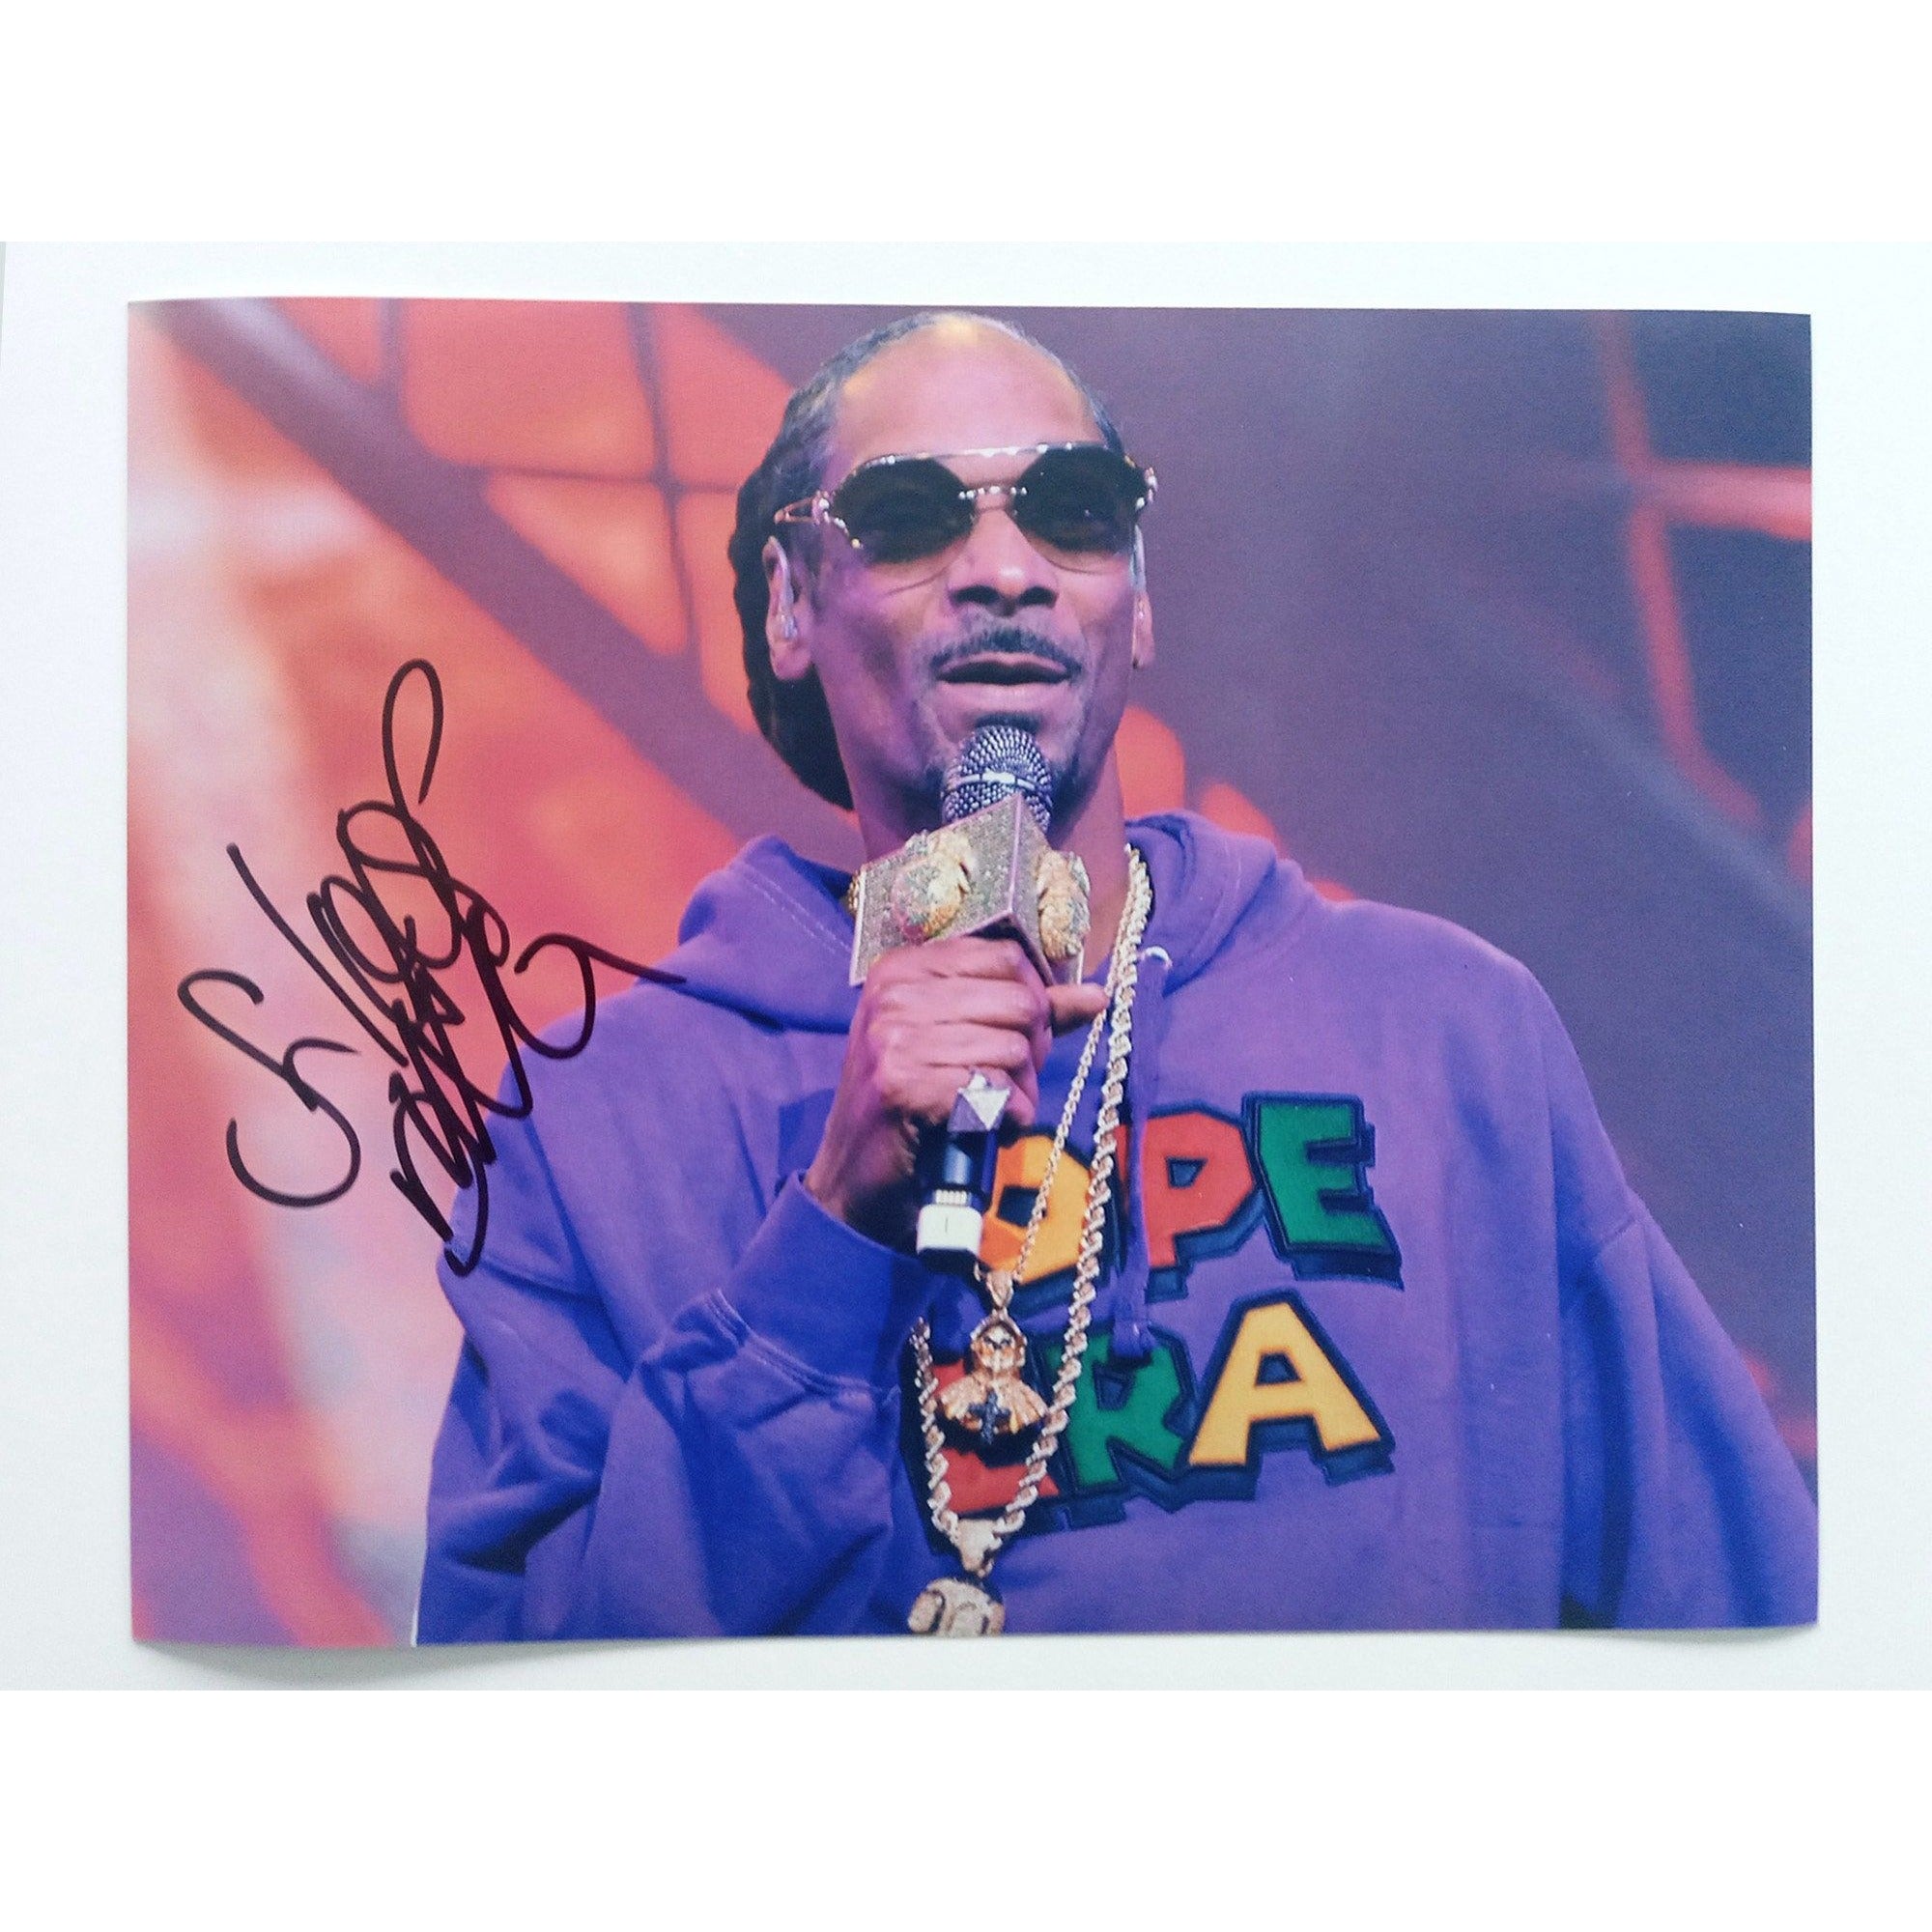 Calvin Broadus Snoop Dogg 8 by 10 signed photo with proof